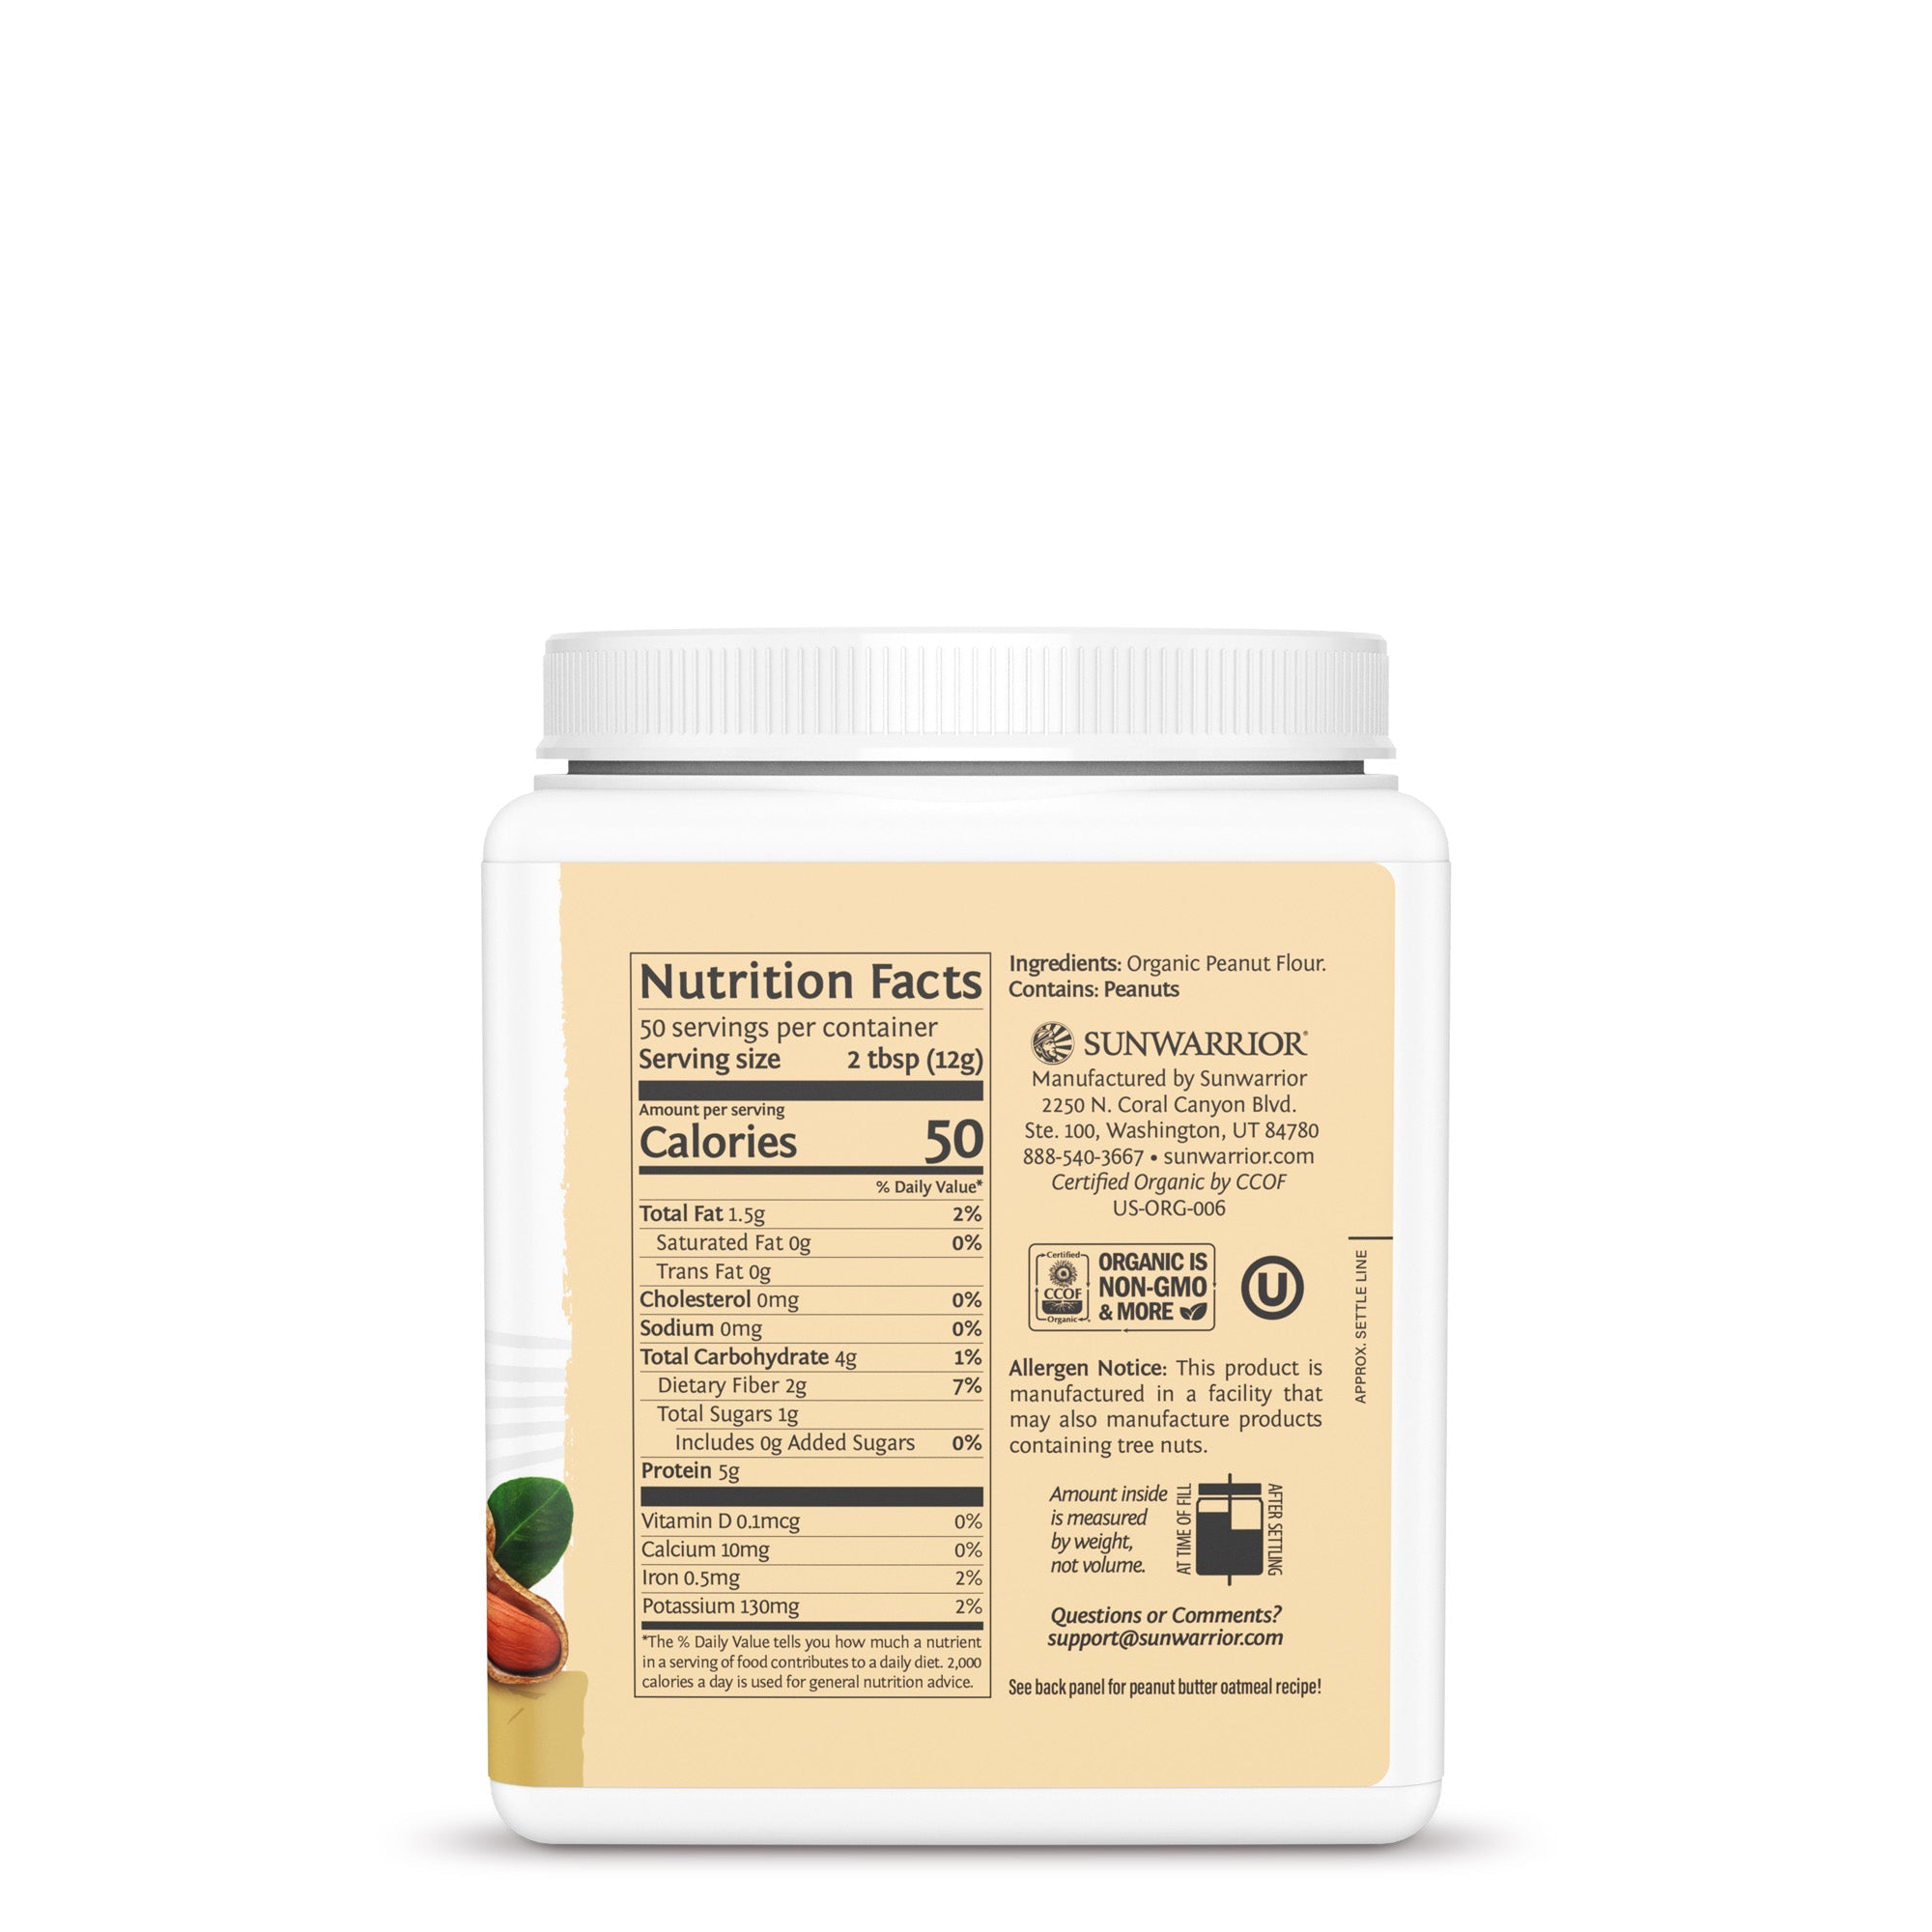 NUTRITIONAL FACTS & INGREDIENTS